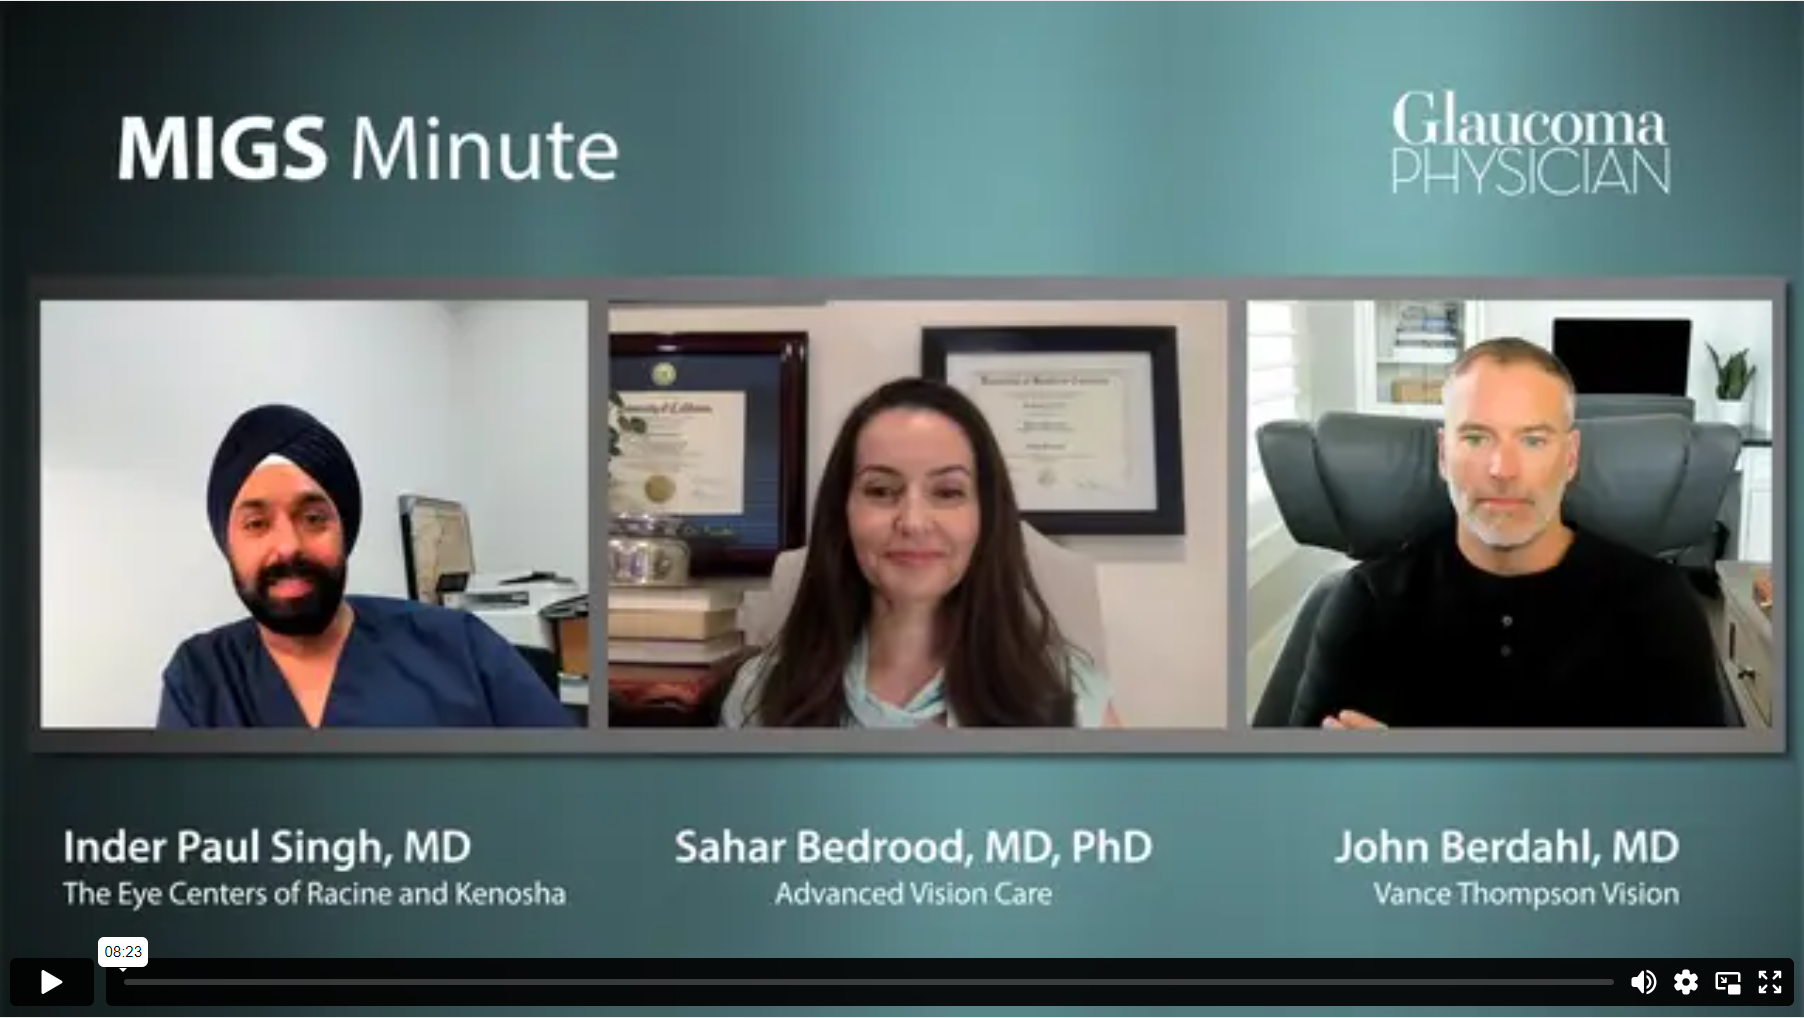 Episode 7: Inder Paul Singh, MD, Sahar Bedrood, MD, PhD, and John Berdahl, MD discuss the iStent Infinite trial.